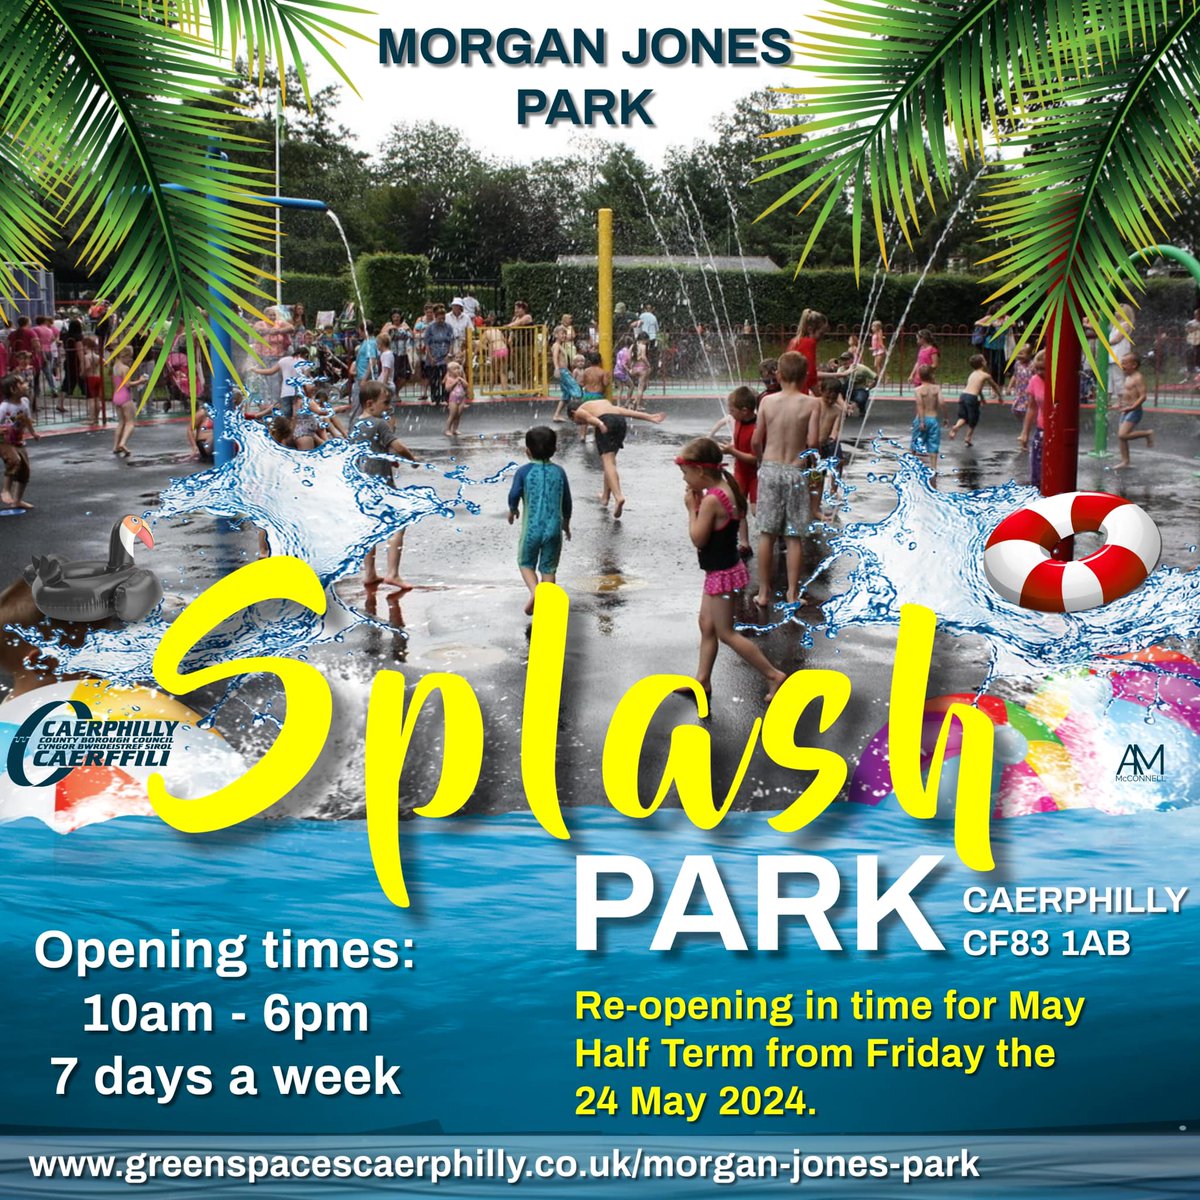 The splash pad will be open in ten days time 🌞